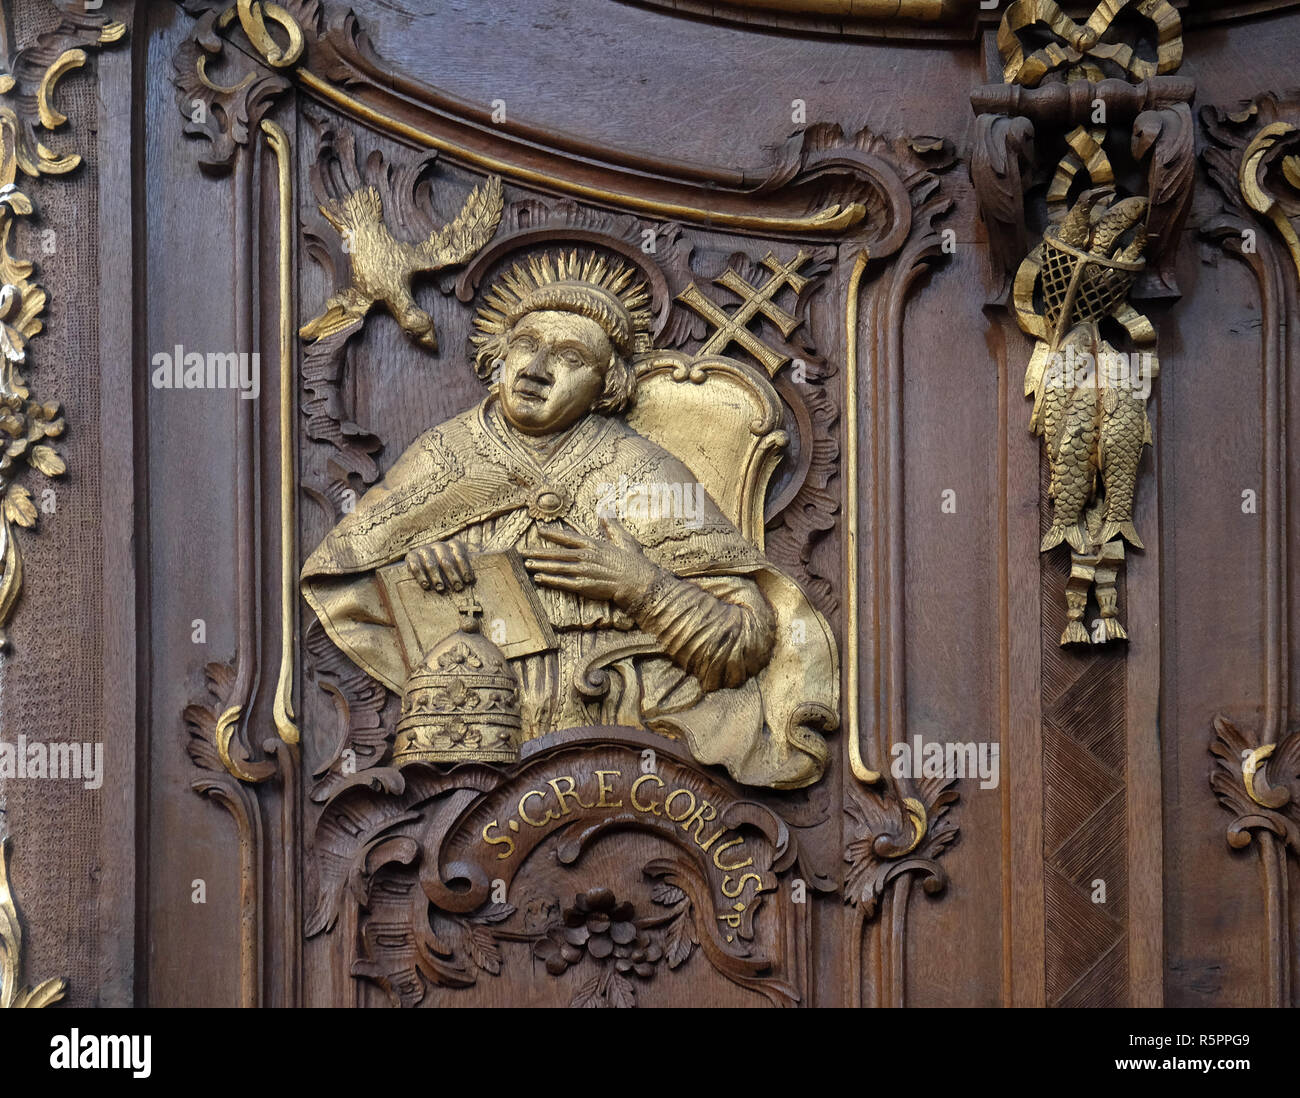 Saint Gregory the Great, one of the Latin Fathers of the Church, choir stalls by Daniel Aschauer in Cistercian Abbey of Bronbach in Reicholzheim near  Stock Photo